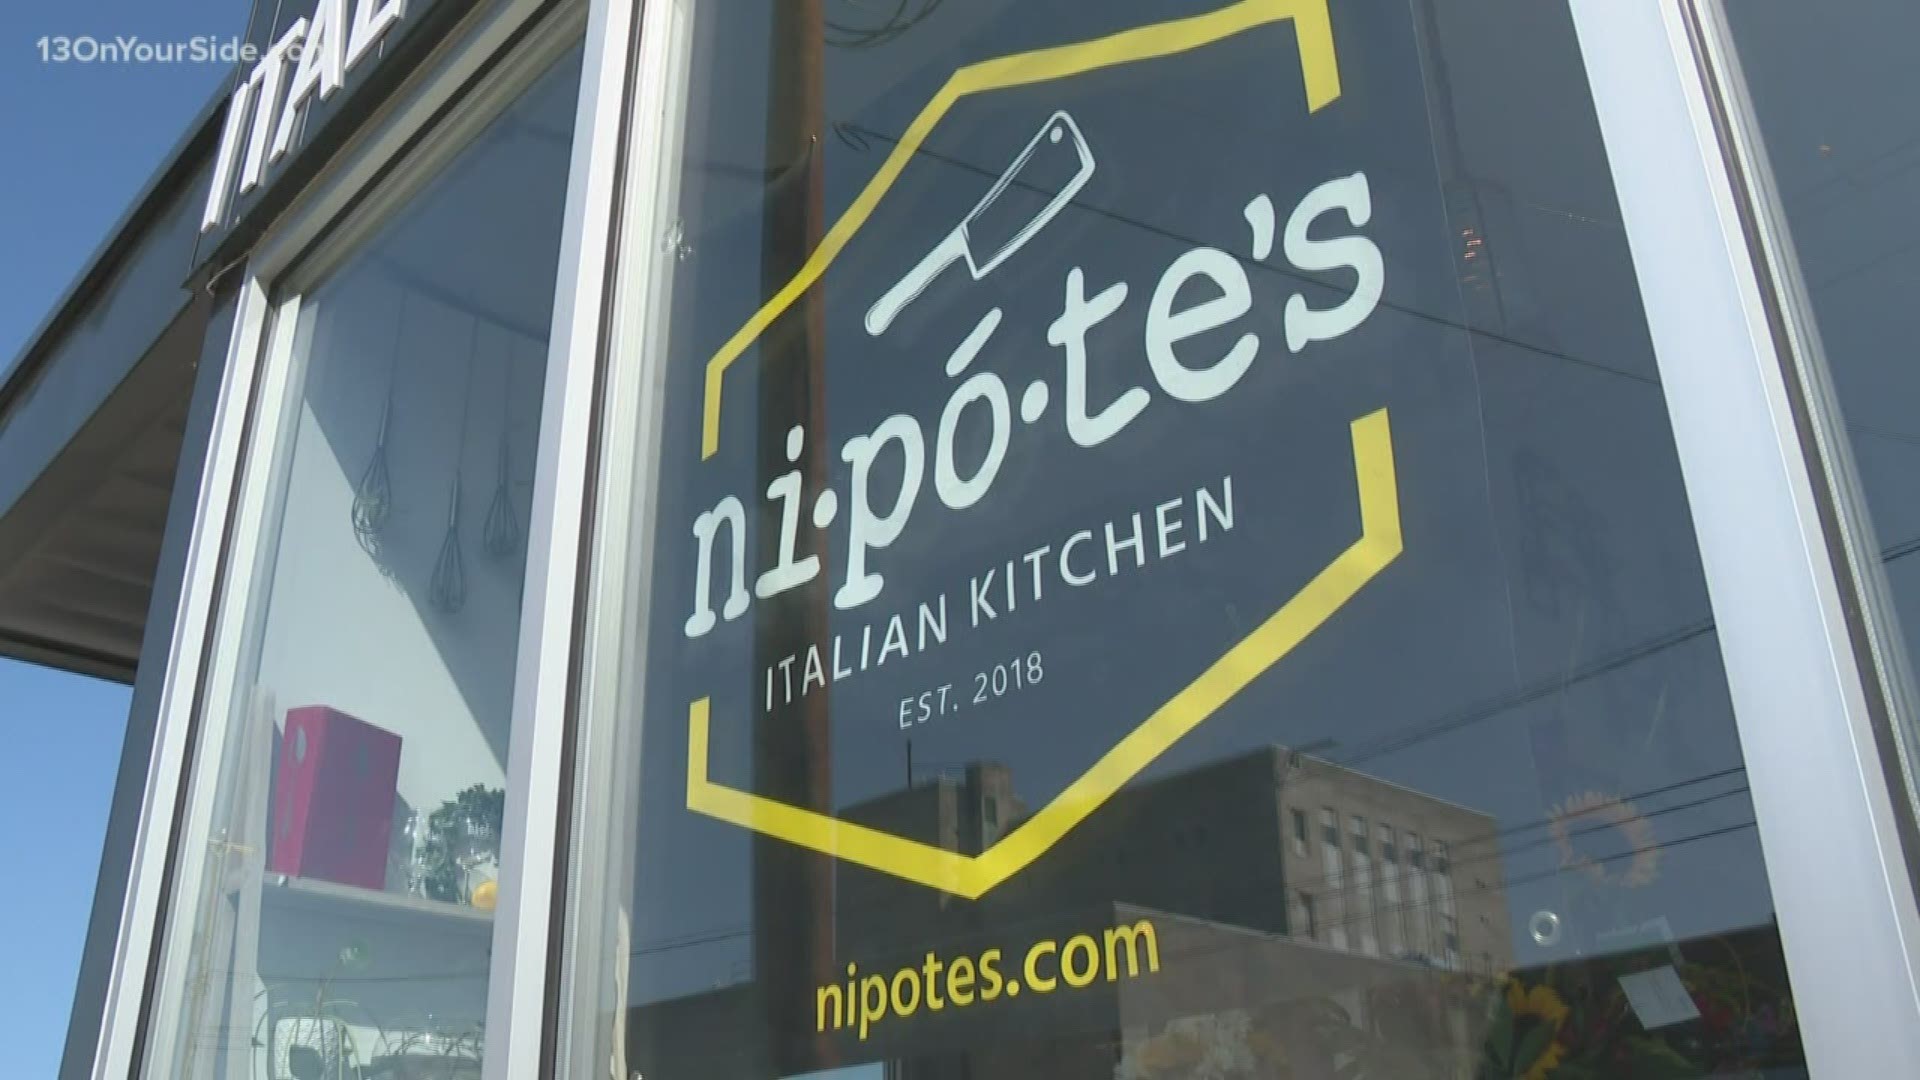 Owners believe it's the first full-service restaurant in the U.S. of its kind.